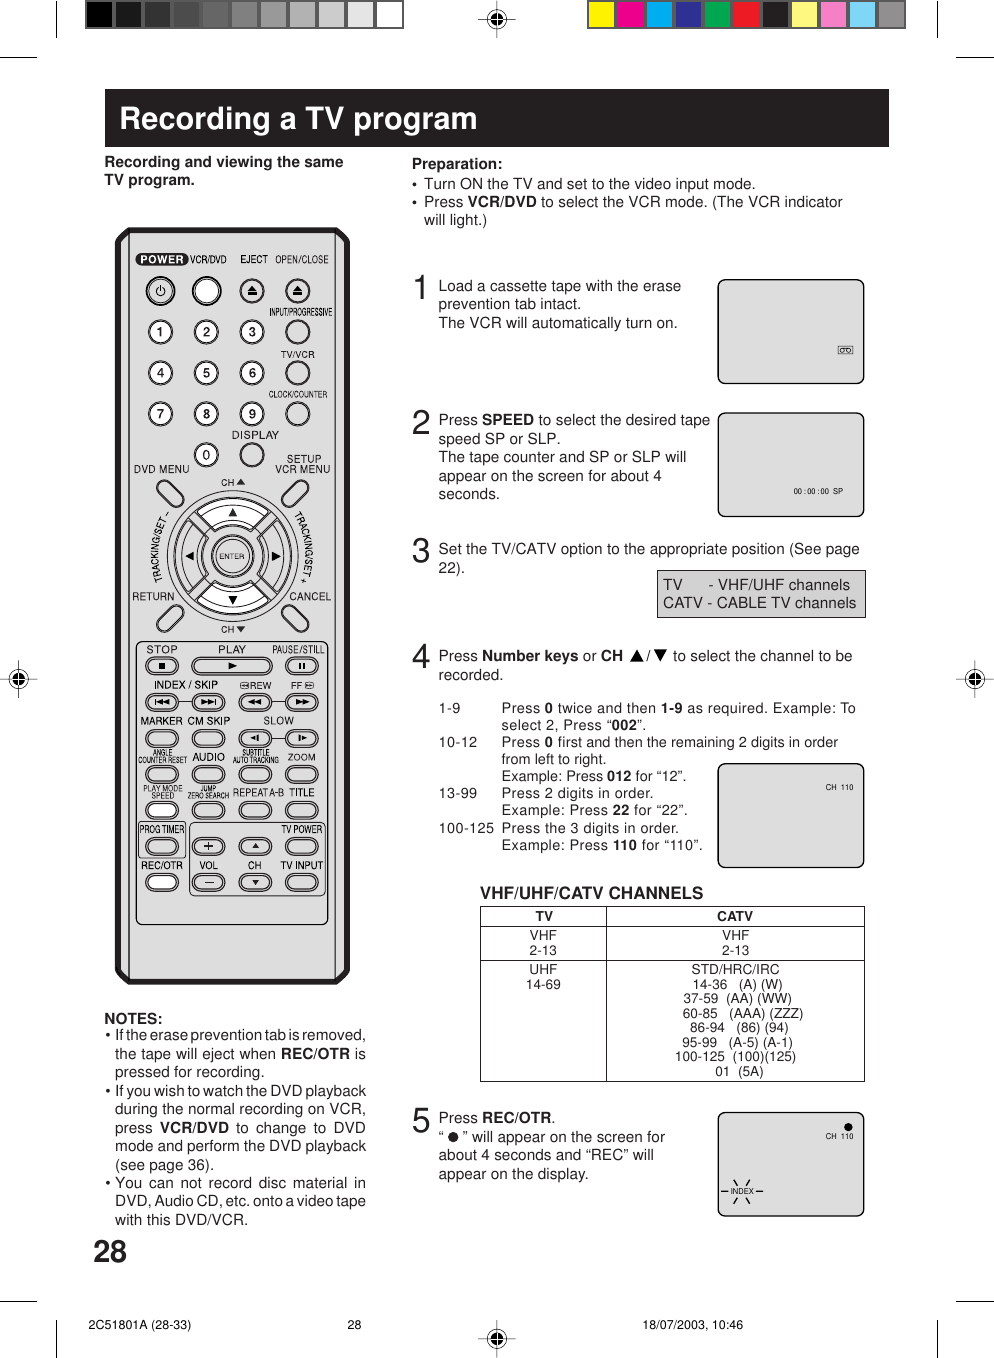 283Recording a TV programLoad a cassette tape with the eraseprevention tab intact.The VCR will automatically turn on.Set the TV/CATV option to the appropriate position (See page22).12Press SPEED to select the desired tapespeed SP or SLP.The tape counter and SP or SLP willappear on the screen for about 4seconds.4TV      - VHF/UHF channelsCATV - CABLE TV channelsRecording and viewing the sameTV program.Press Number keys or CH  / to select the channel to berecorded.VHF/UHF/CATV CHANNELSTV CATVVHF2-13UHF14-69VHF2-13STD/HRC/IRC 14-36   (A) (W) 37-59  (AA) (WW)    60-85   (AAA) (ZZZ)  86-94   (86) (94) 95-99   (A-5) (A-1)100-125  (100)(125)  01  (5A)5Press REC/OTR.“   ” will appear on the screen forabout 4 seconds and “REC” willappear on the display.NOTES:• If the erase prevention tab is removed,the tape will eject when REC/OTR ispressed for recording.• If you wish to watch the DVD playbackduring the normal recording on VCR,press  VCR/DVD to change to DVDmode and perform the DVD playback(see page 36).• You can not record disc material inDVD, Audio CD, etc. onto a video tapewith this DVD/VCR.Turn ON the TV and set to the video input mode.Press VCR/DVD to select the VCR mode. (The VCR indicatorwill light.)Preparation:••00 : 00 : 00  SPCH  110CH  110INDEX1-9 Press 0 twice and then 1-9 as required. Example: Toselect 2, Press “002”.10-12 Press 0 first and then the remaining 2 digits in orderfrom left to right.Example: Press 012 for “12”.13-99 Press 2 digits in order.Example: Press 22 for “22”.100-125 Press the 3 digits in order.Example: Press 110 for “110”. 2C51801A (28-33) 18/07/2003, 10:4628